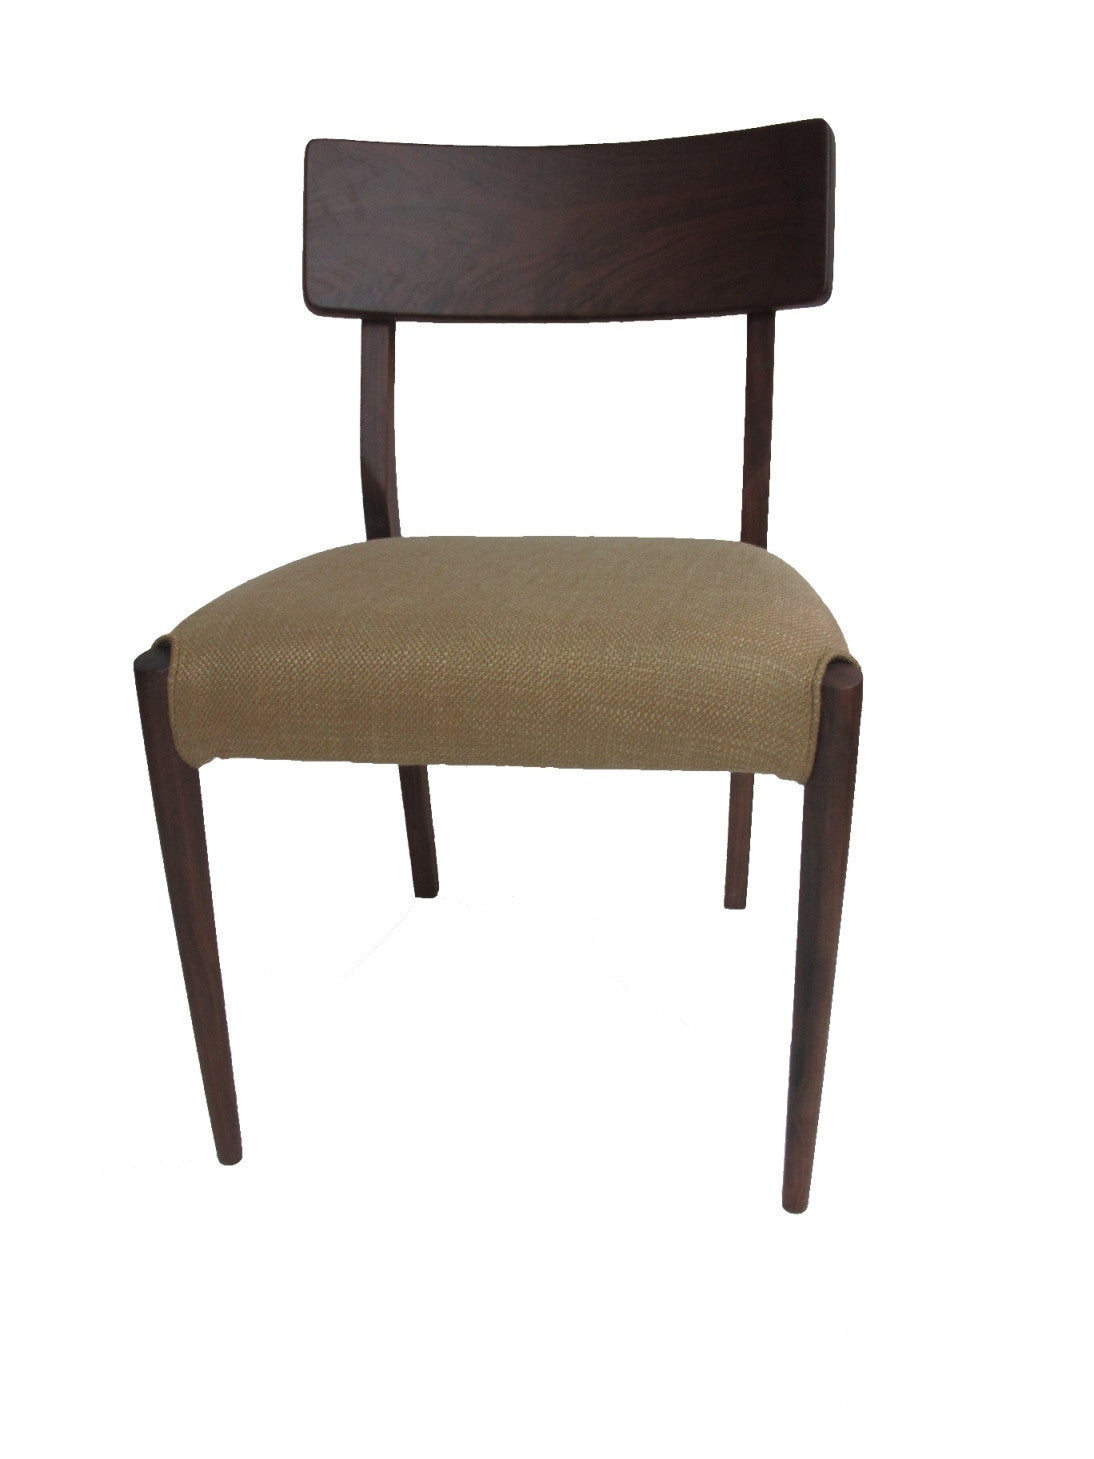 Tastefully made simple back chair, Koi chair is adaptable to mid century or modern dining tables. in solid walnut wood.